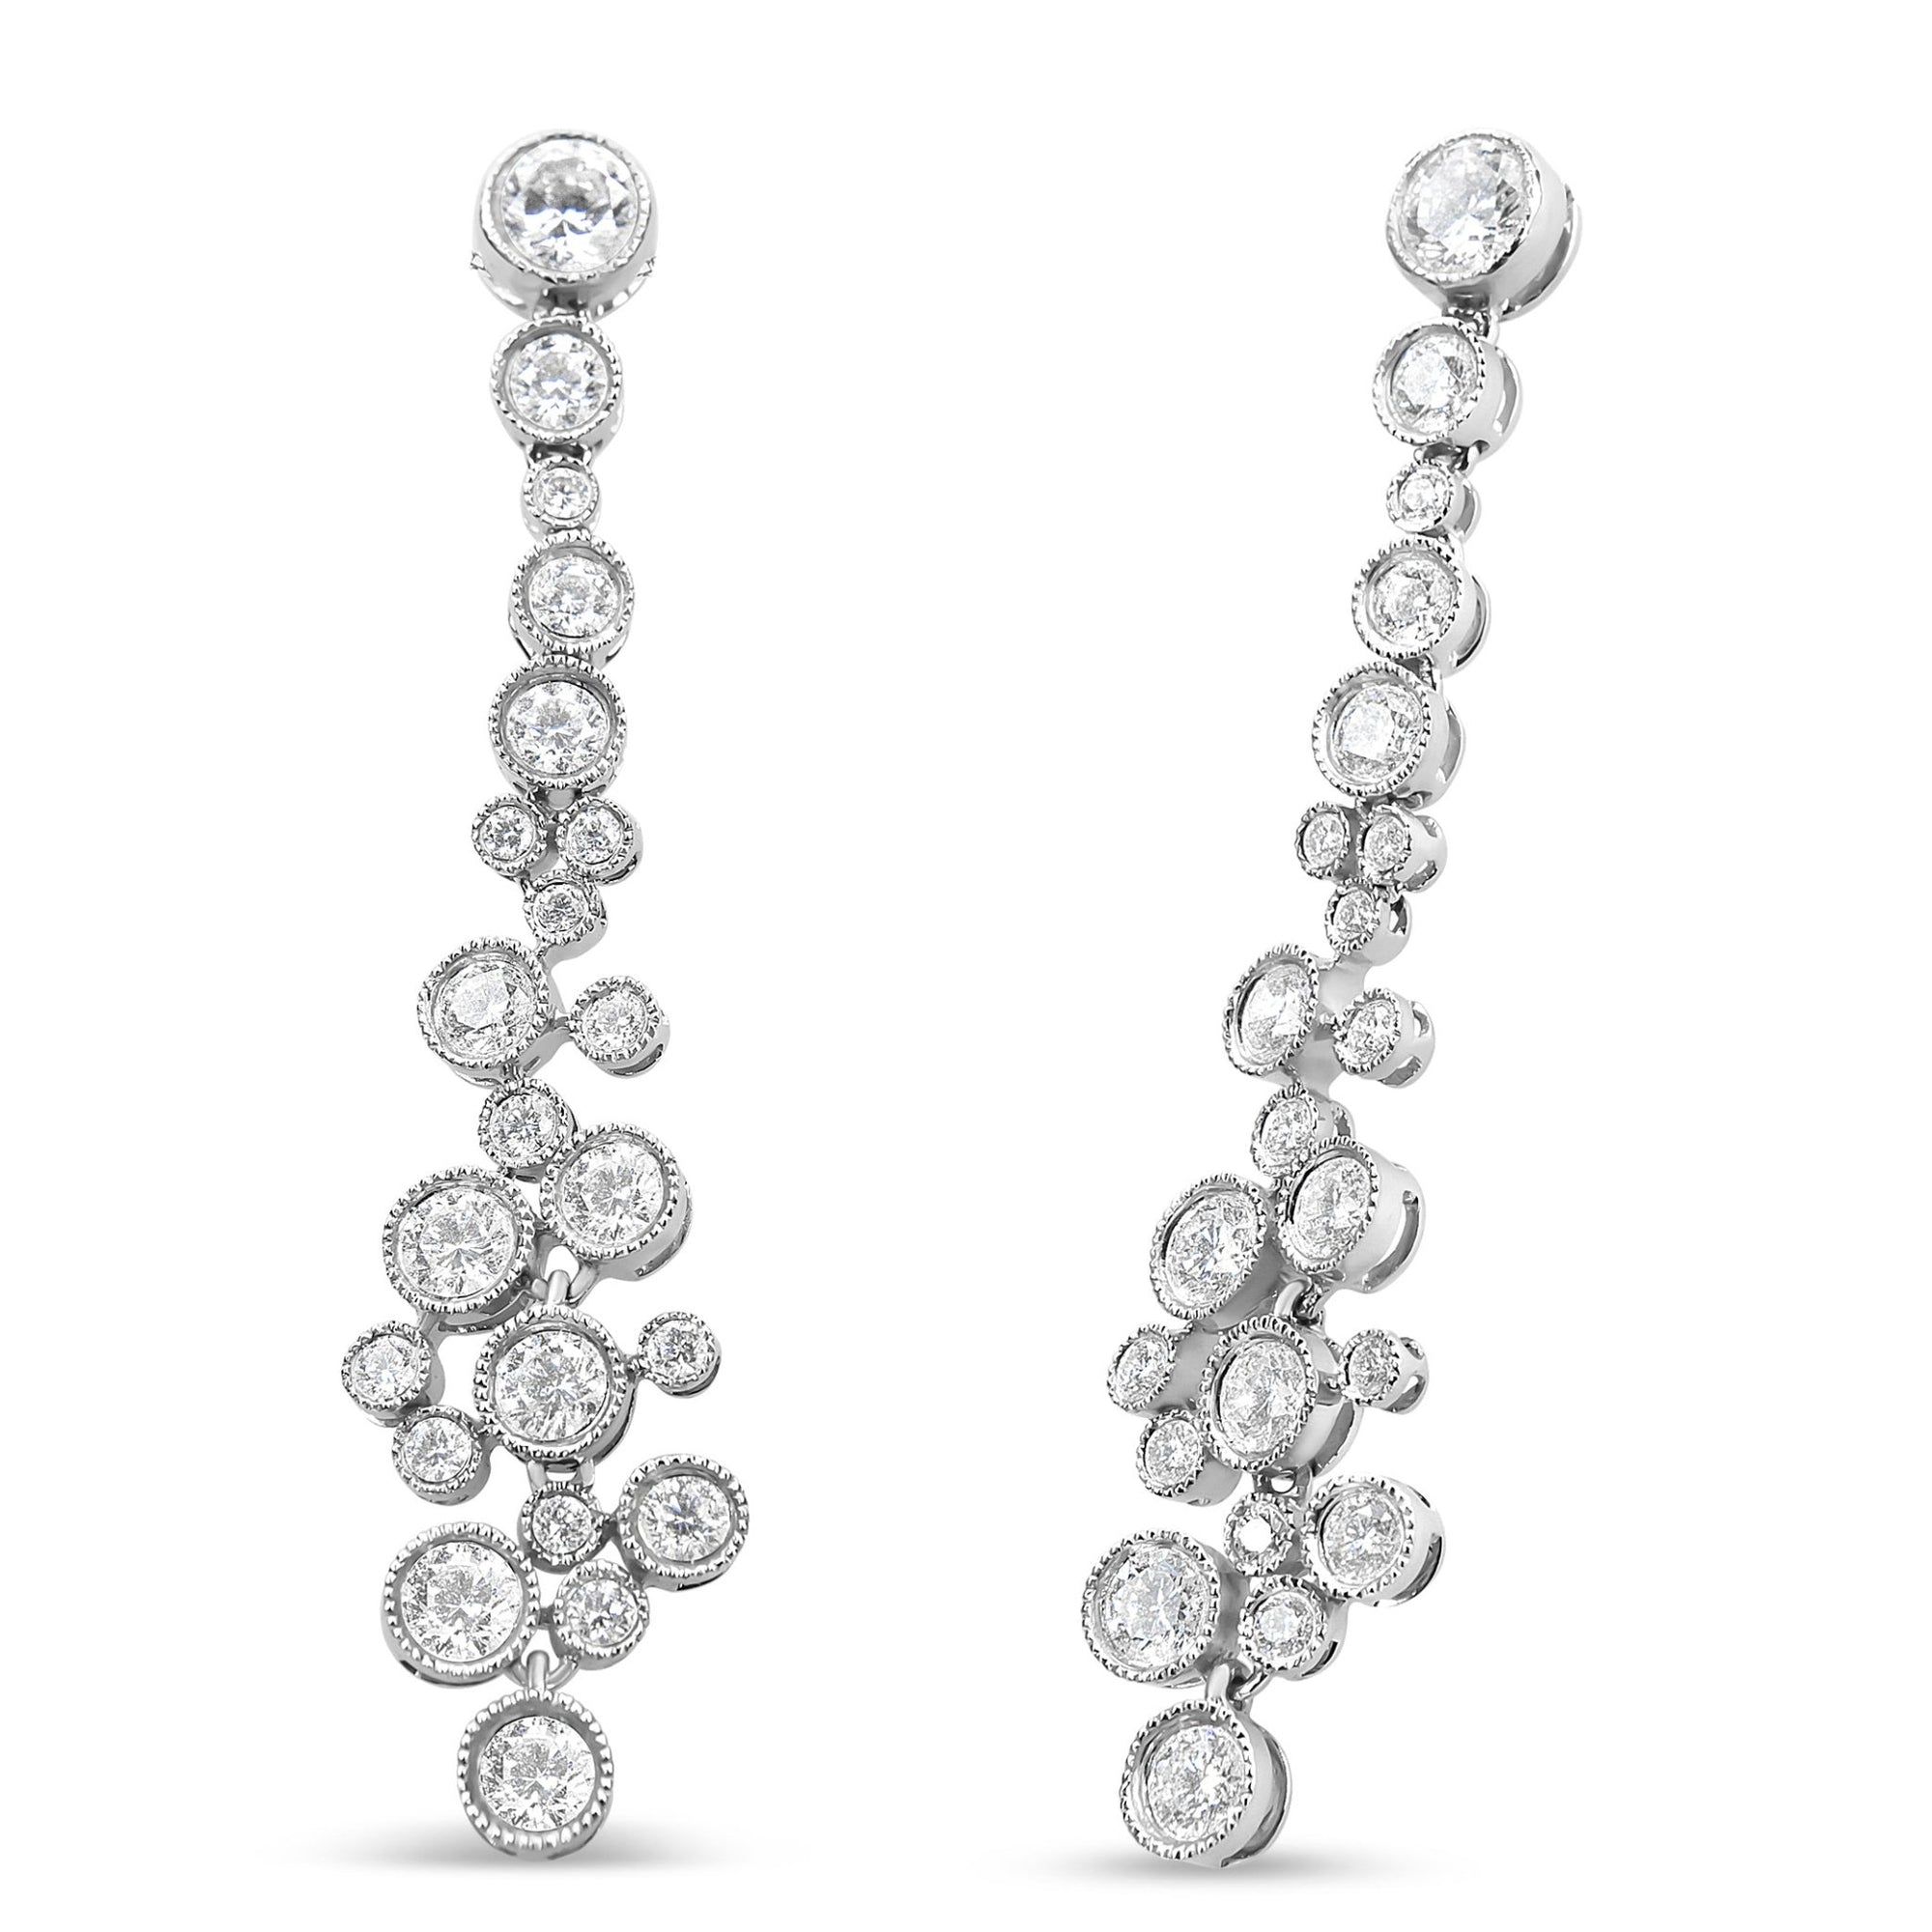 18K White Gold 3.15 Cttw Round Diamond Waterfall Drop Dangle Stud Earrings (H-I Color, VS1-VS2 Clarity) - LinkagejewelrydesignLinkagejewelrydesign